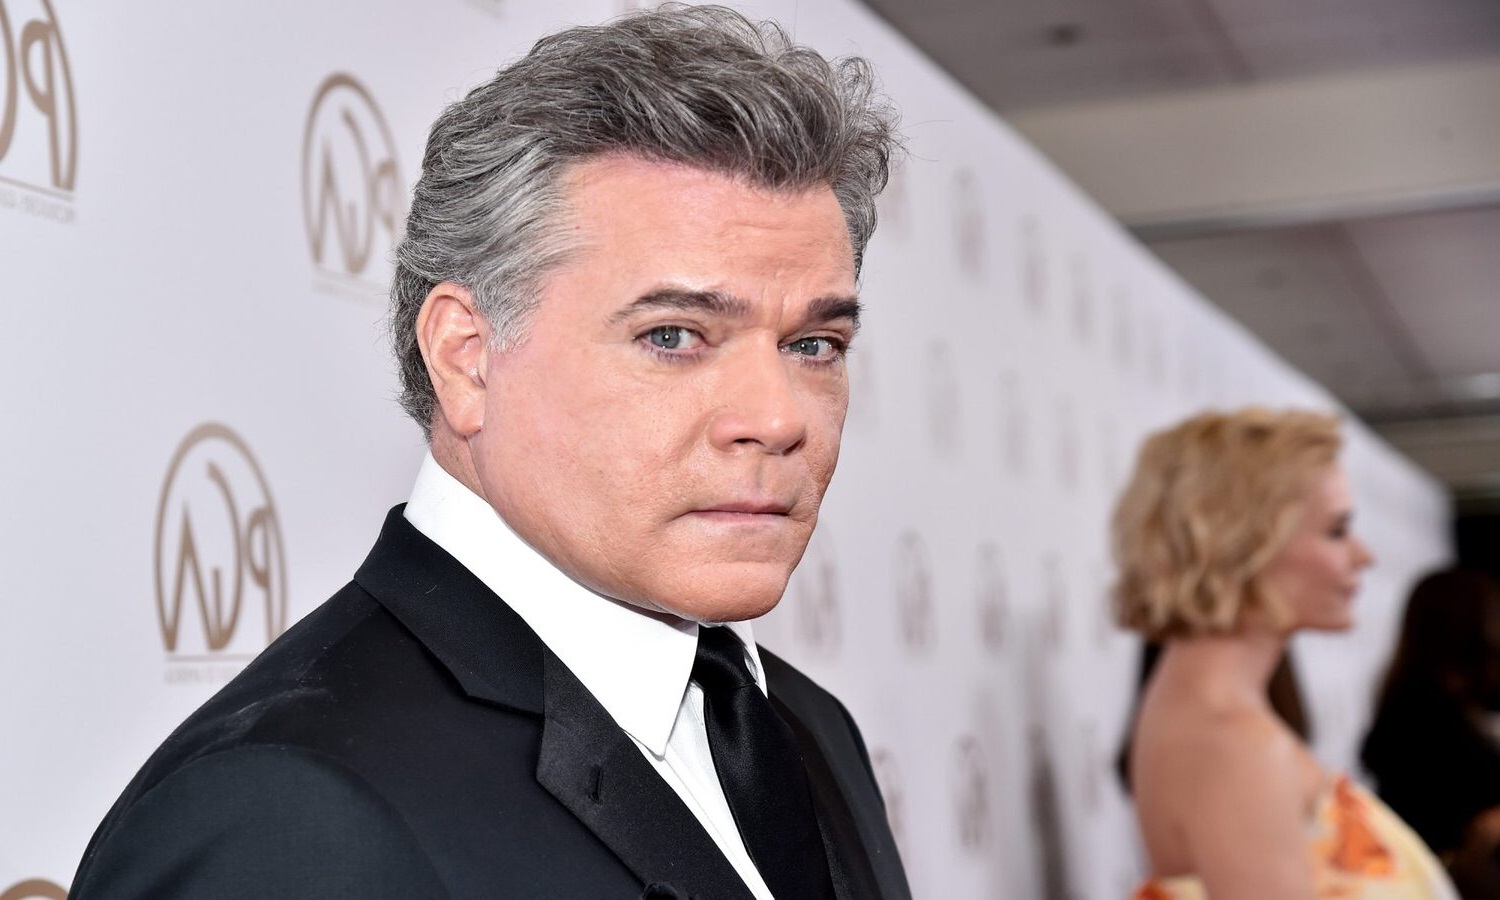 Ray Liotta career Regrets and Rejections The Role He Turned Down in Batman and the Paths Untaken